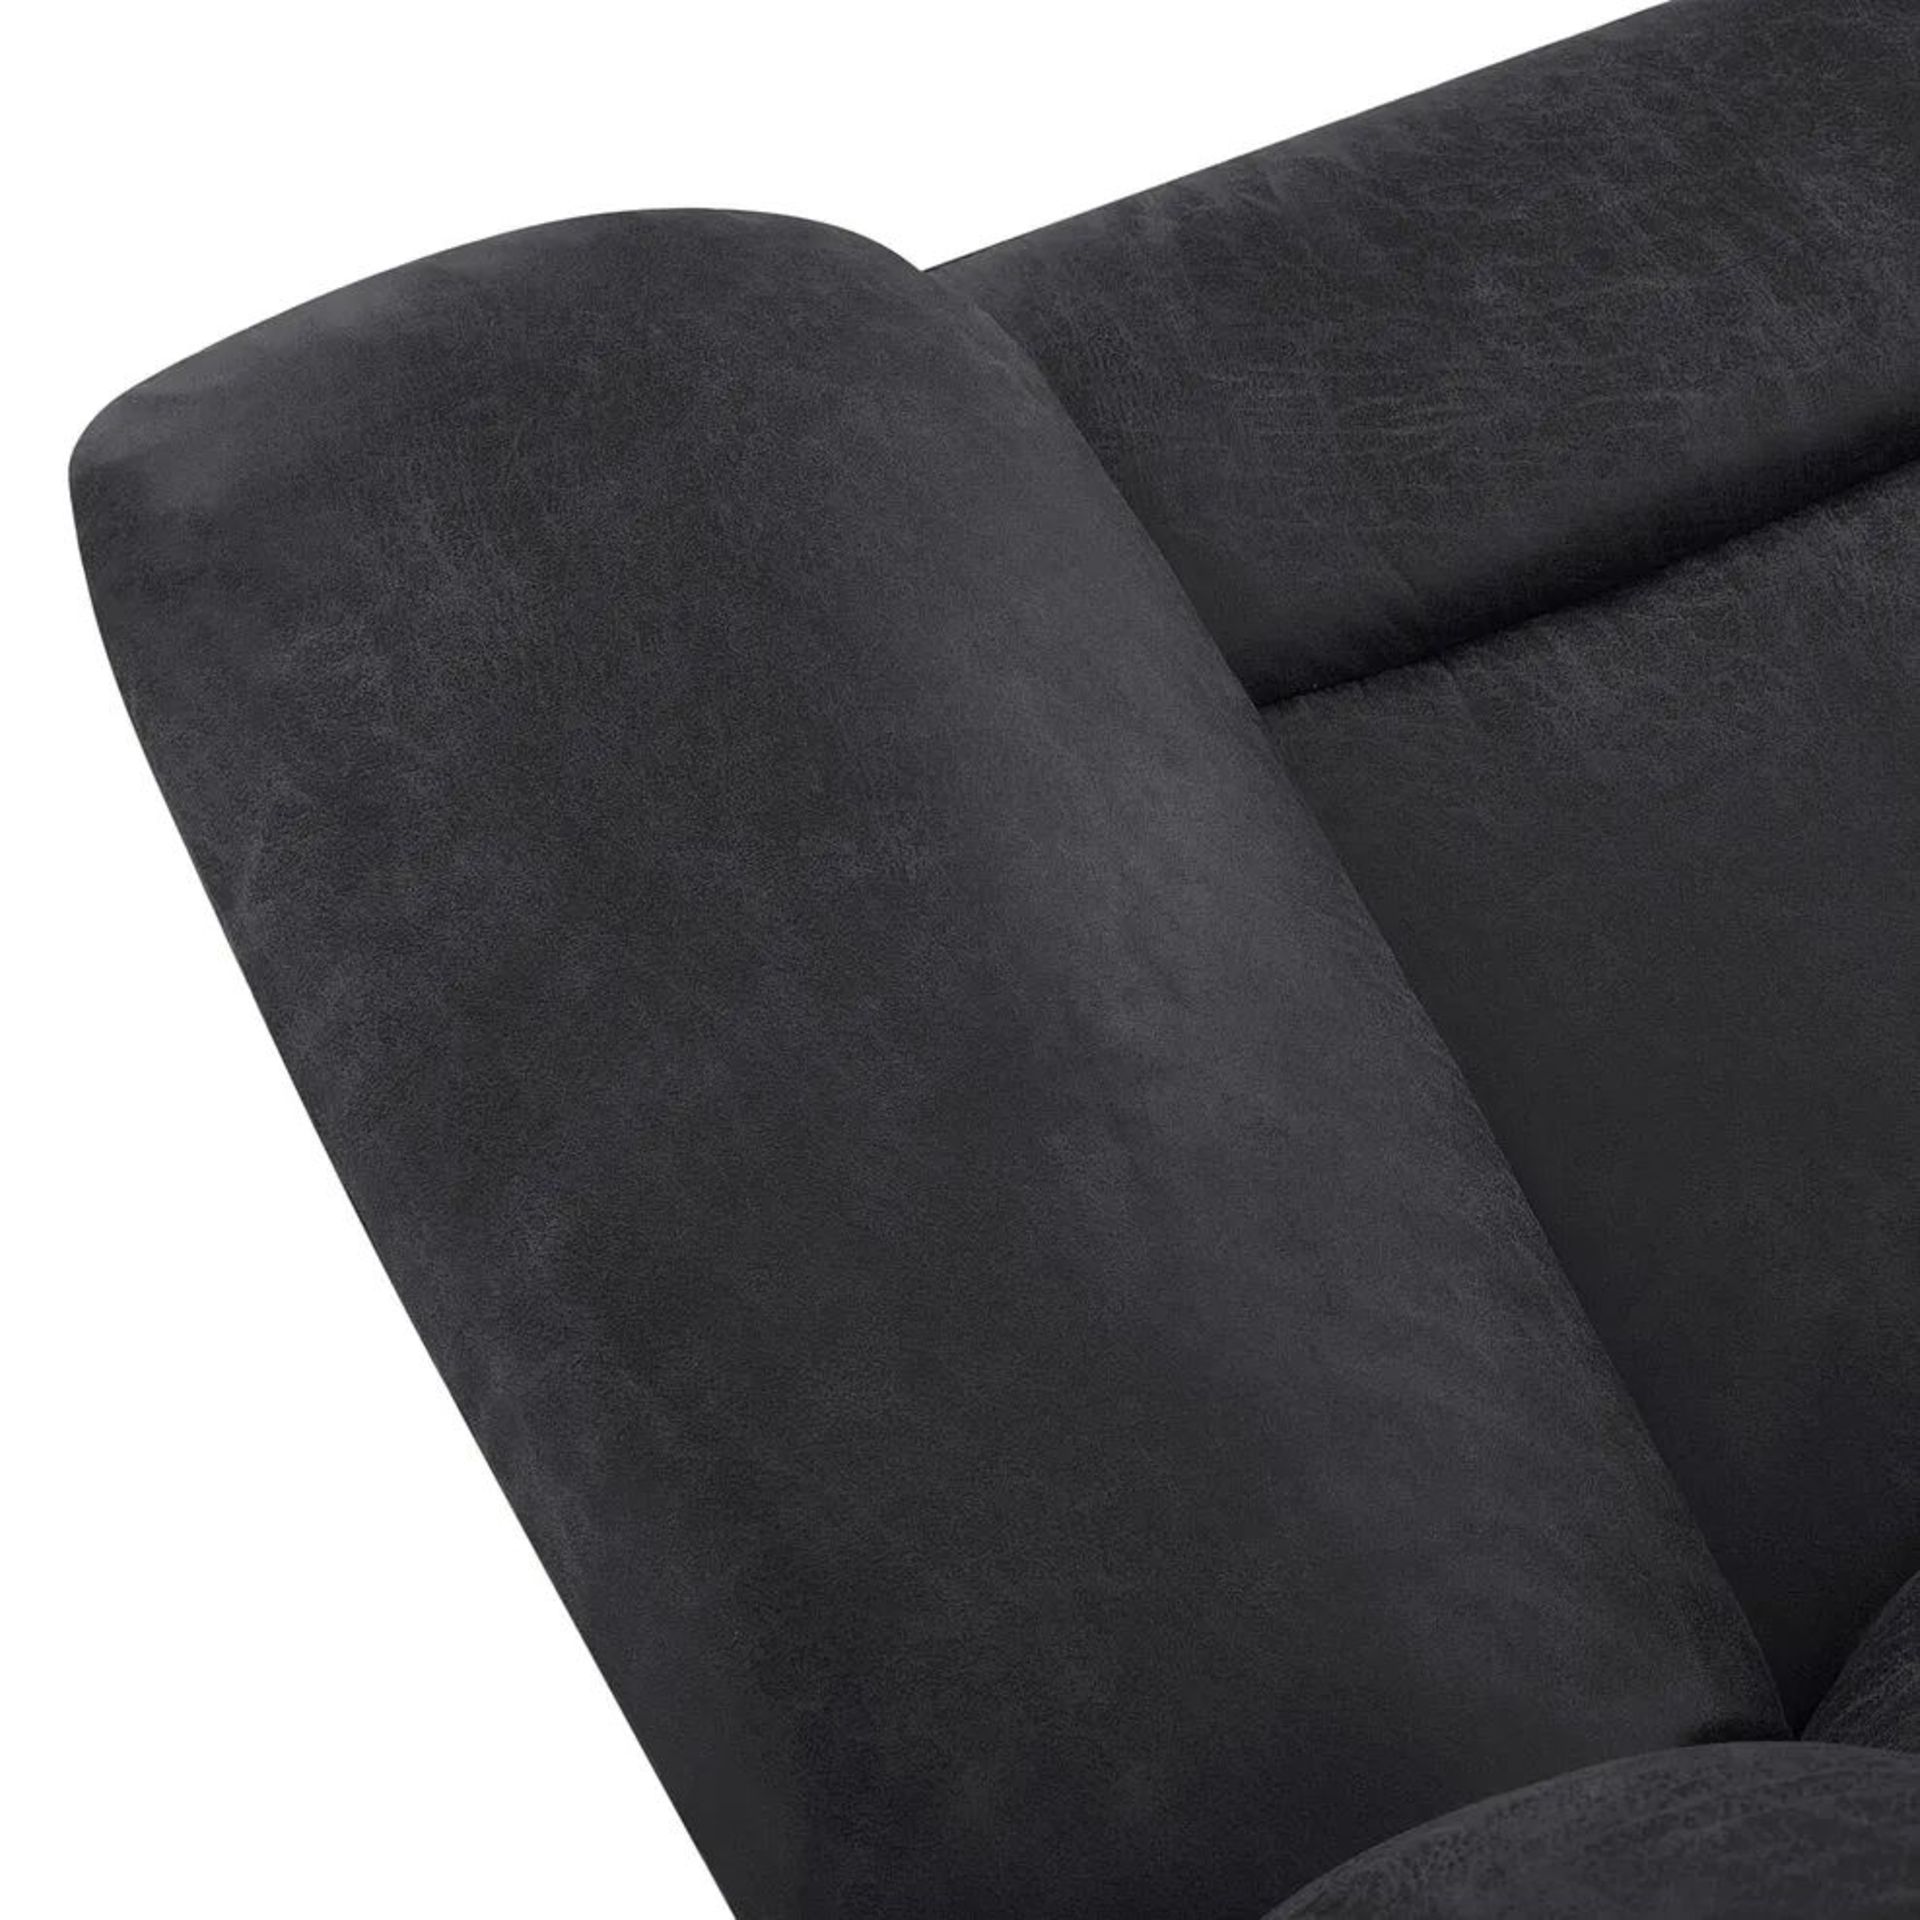 BRAND NEW MARLOW 3 Seater Electric Recliner Sofa - MILLER GREY FABRIC. RRP £1199. Designed to suit - Image 11 of 12